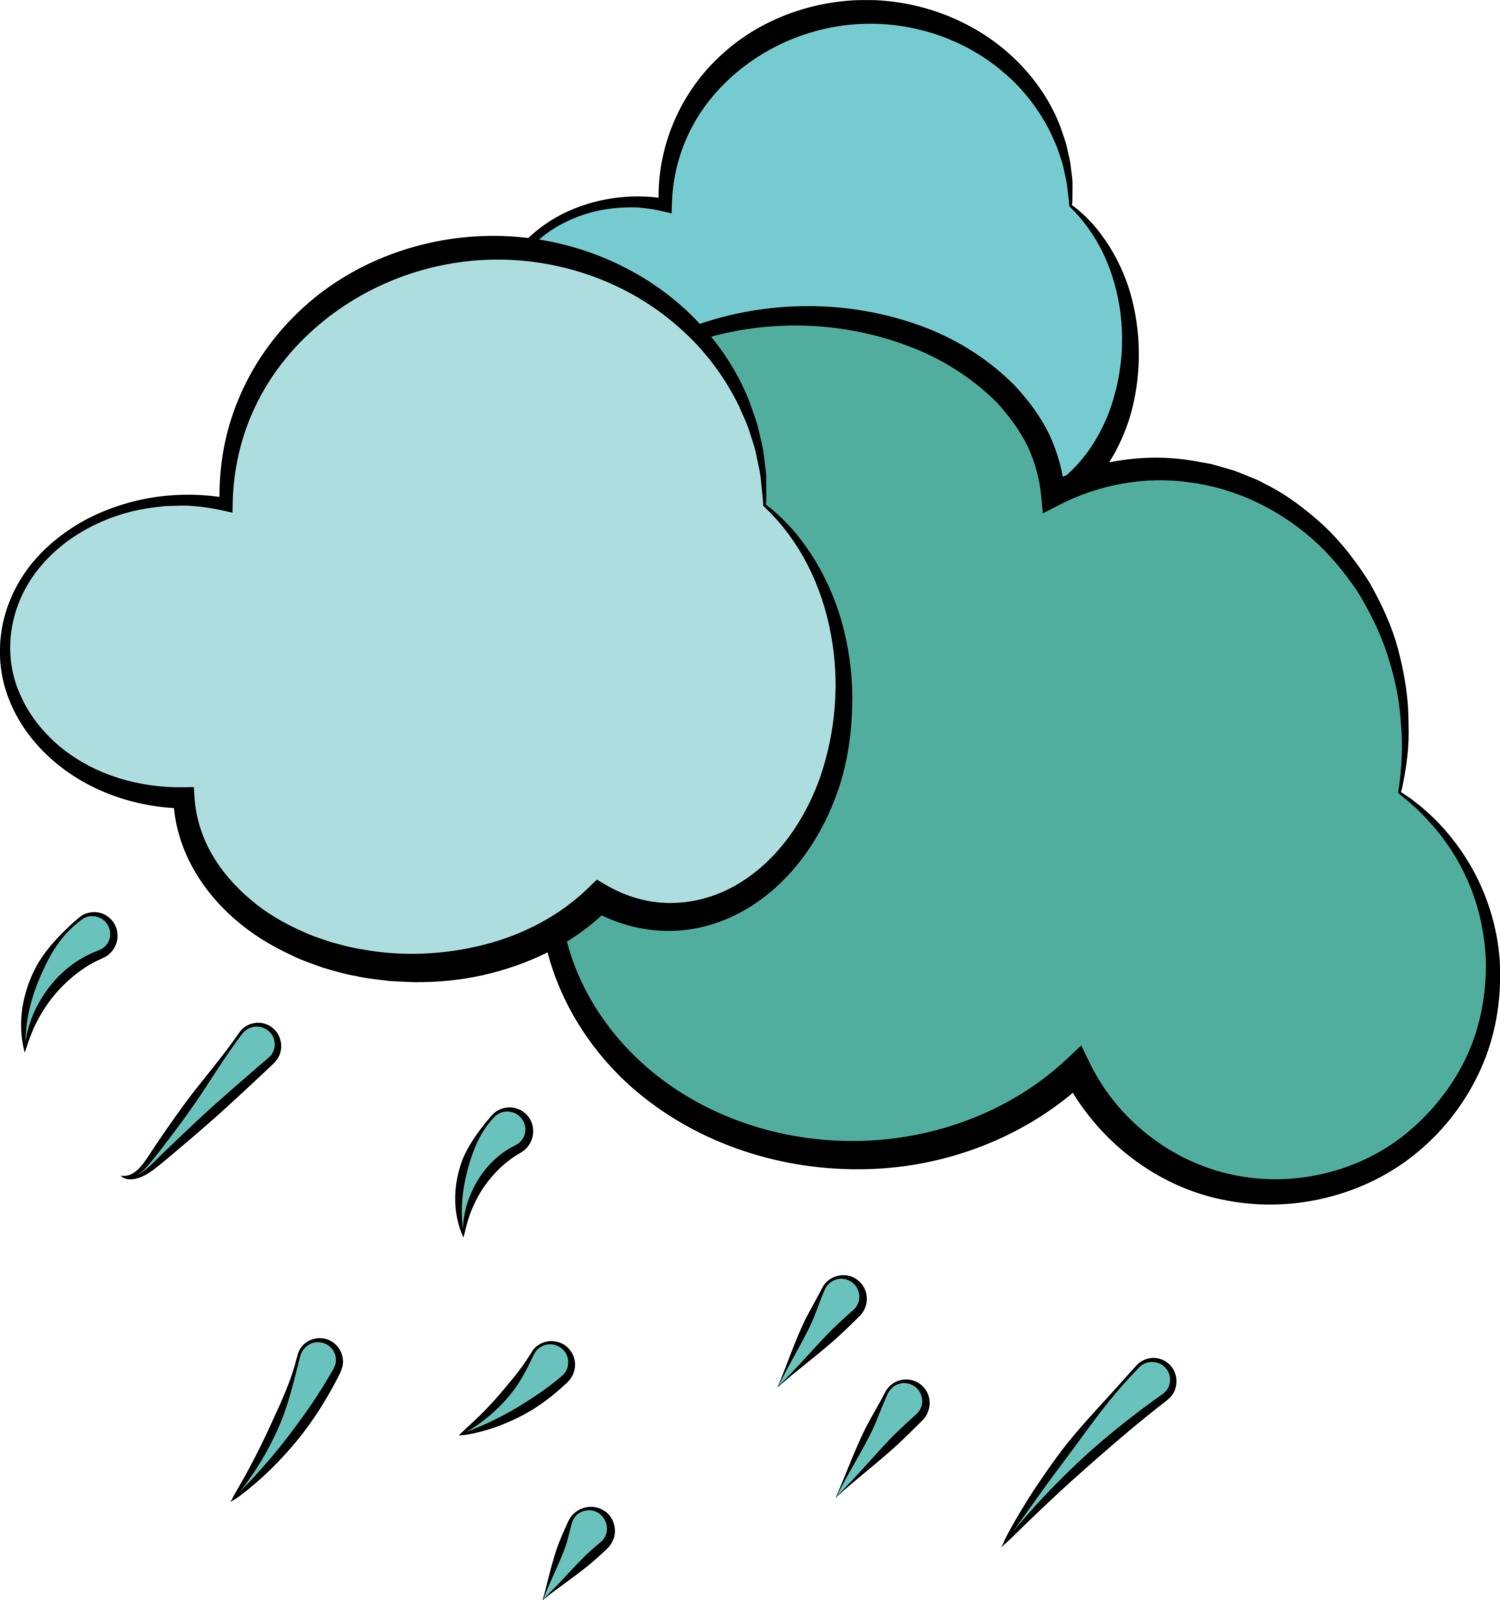 Rainy weather vector or color illustration by Morphart